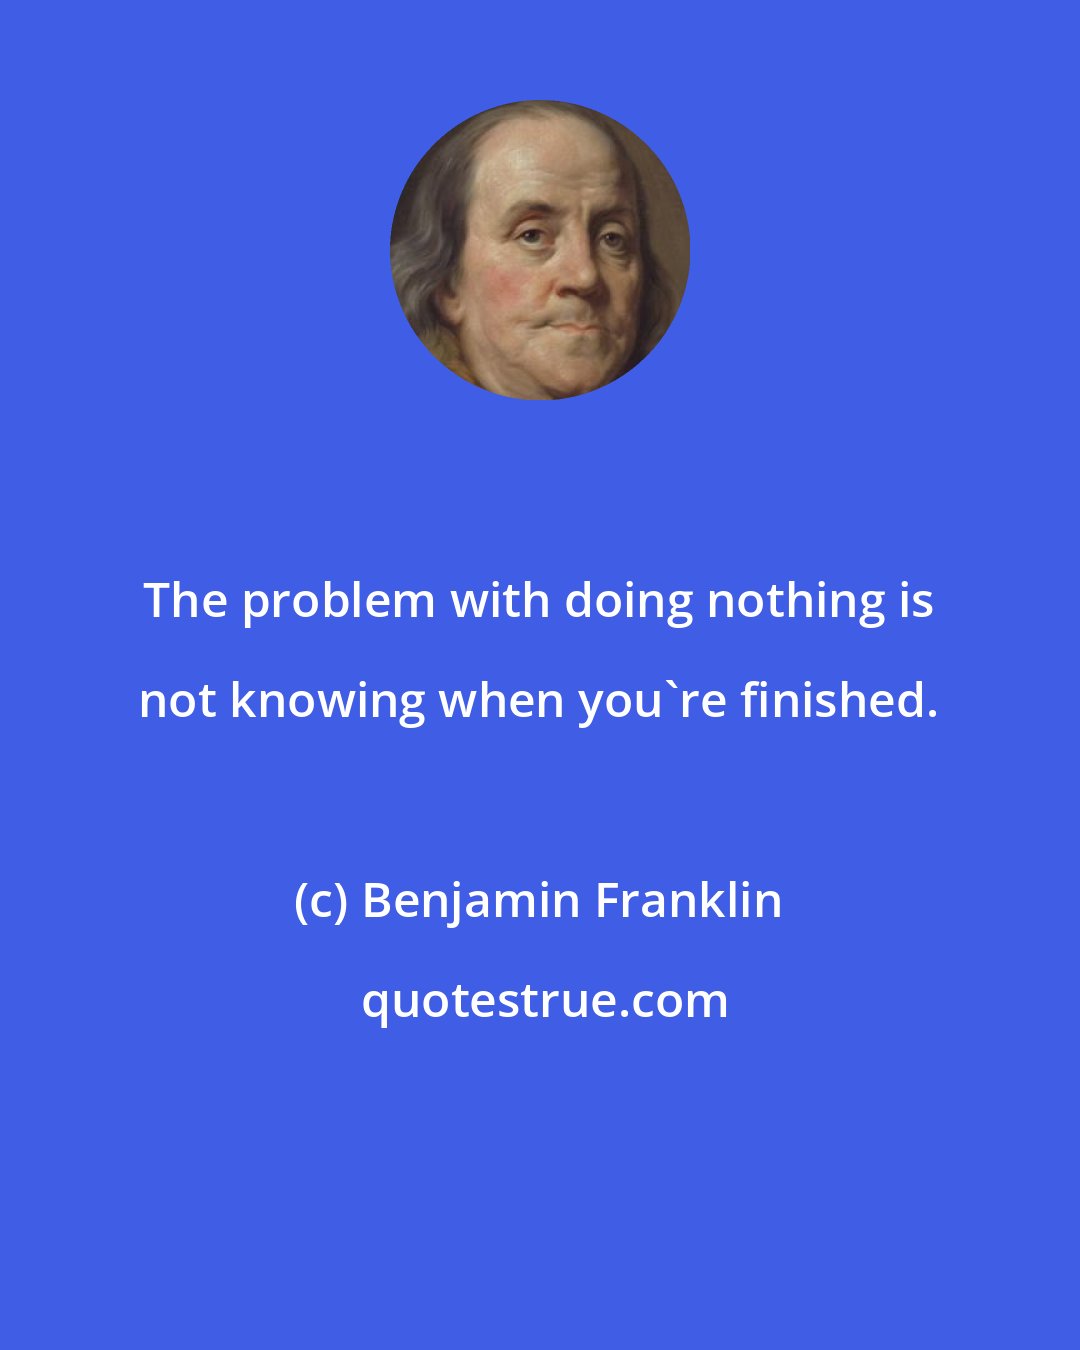 Benjamin Franklin: The problem with doing nothing is not knowing when you're finished.